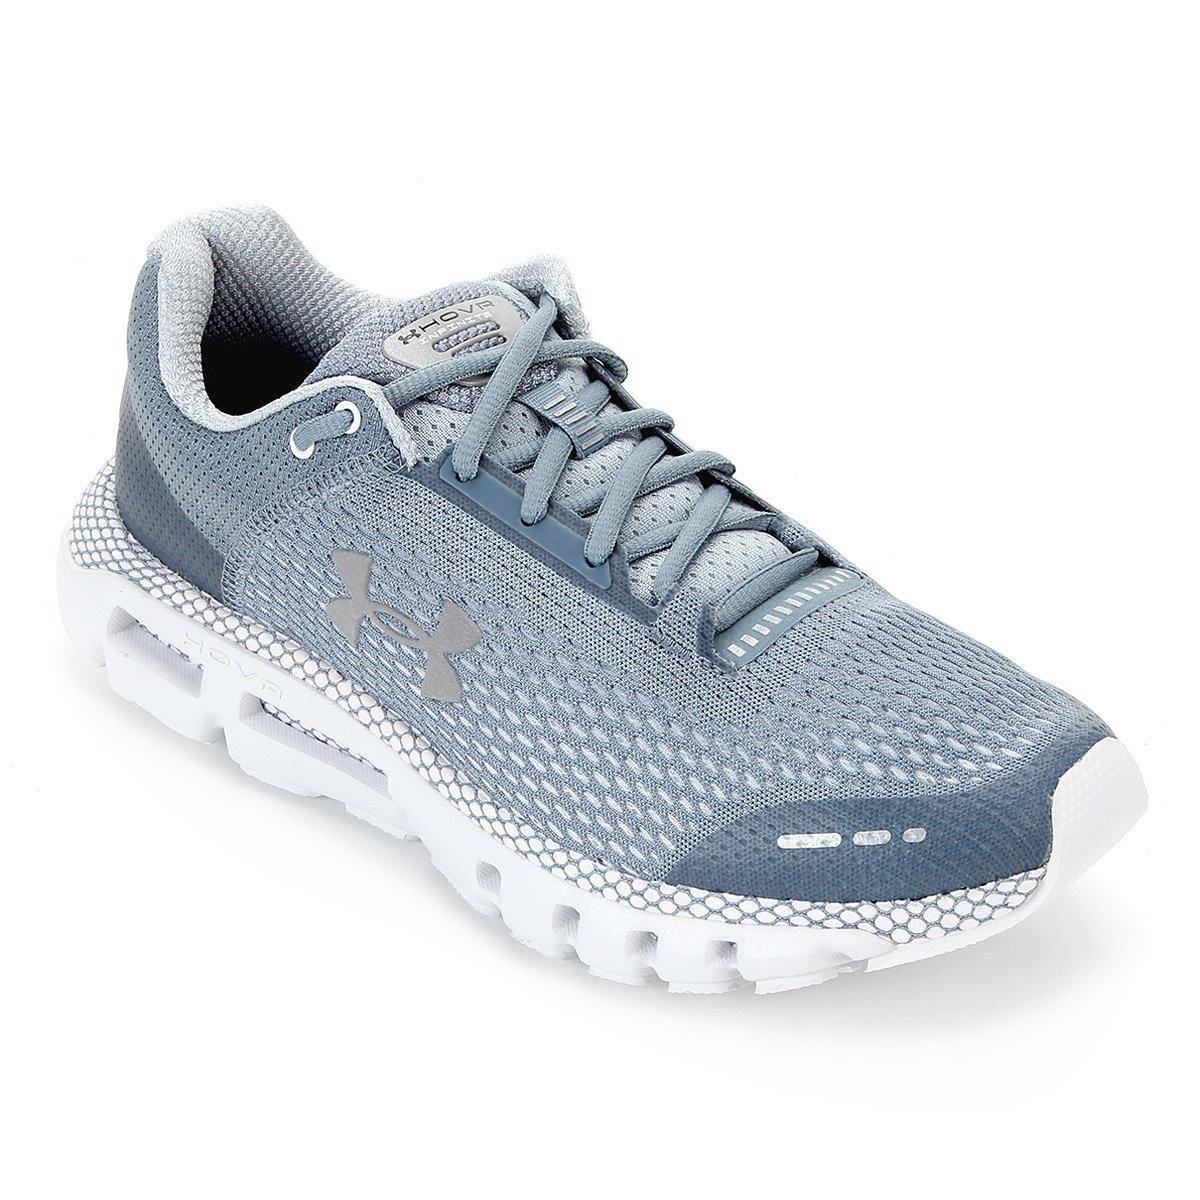 netshoes under armour masculino